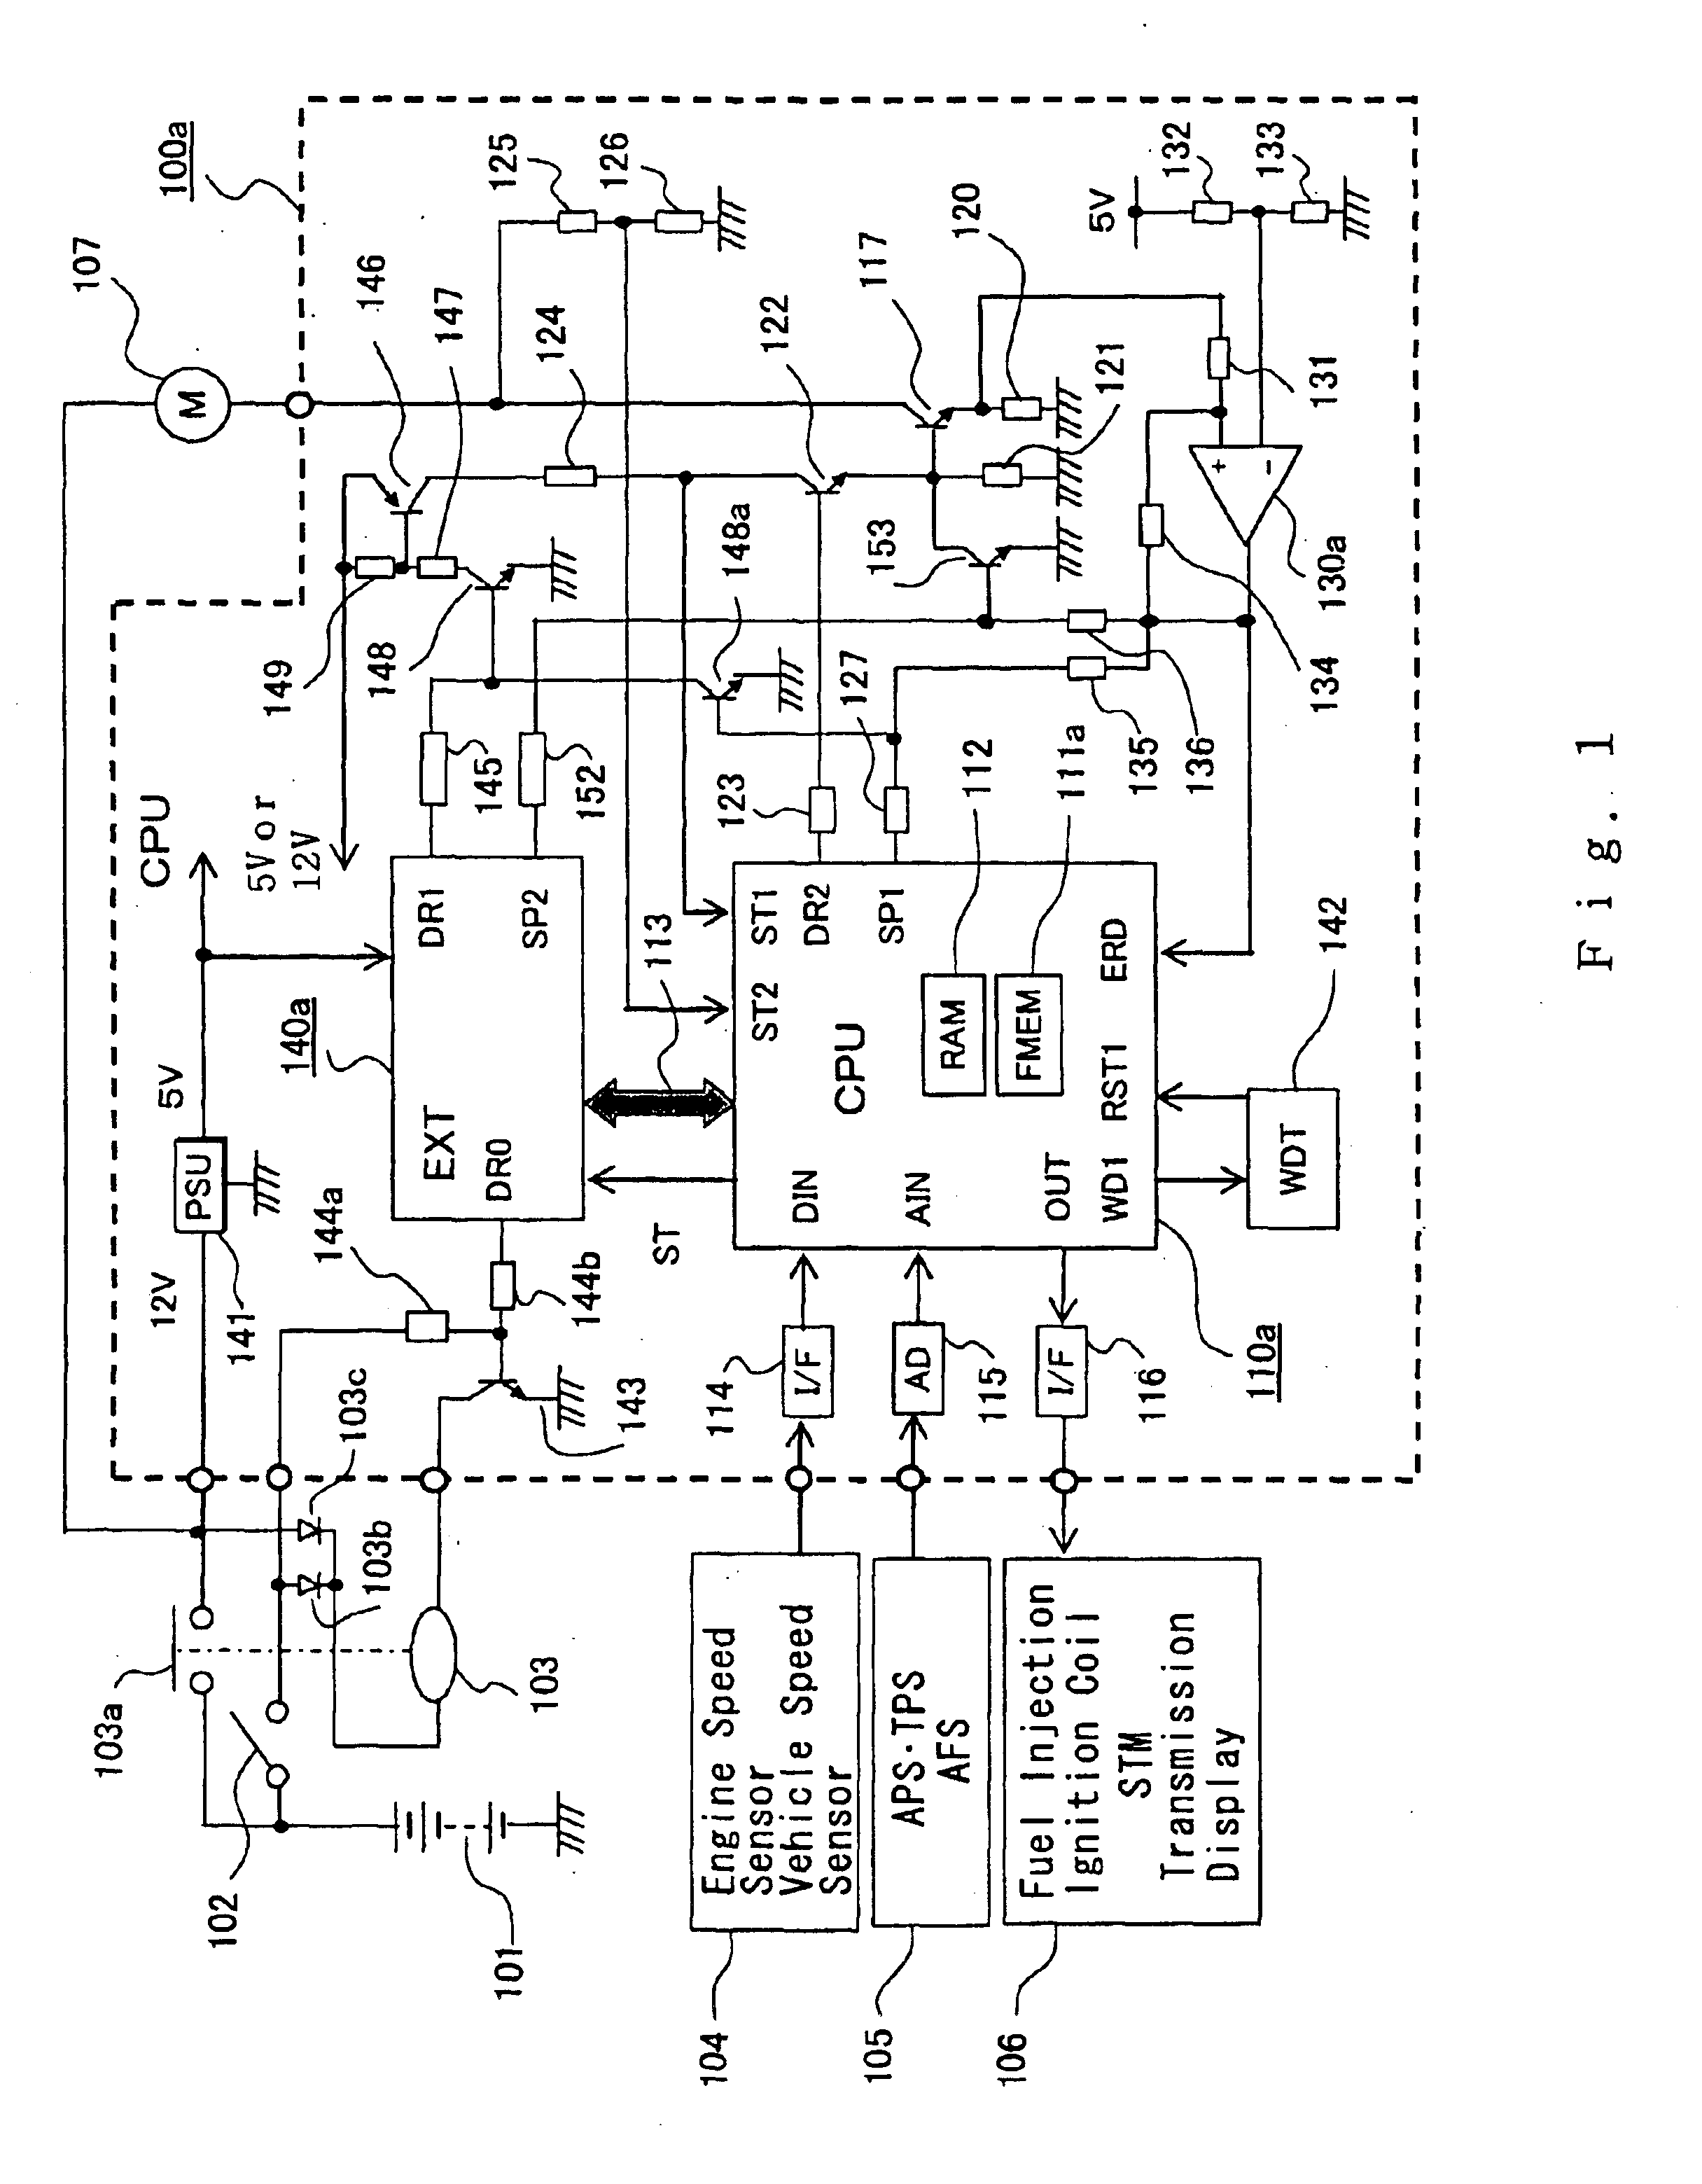 Engine air-intake control device and engine air-intake control method